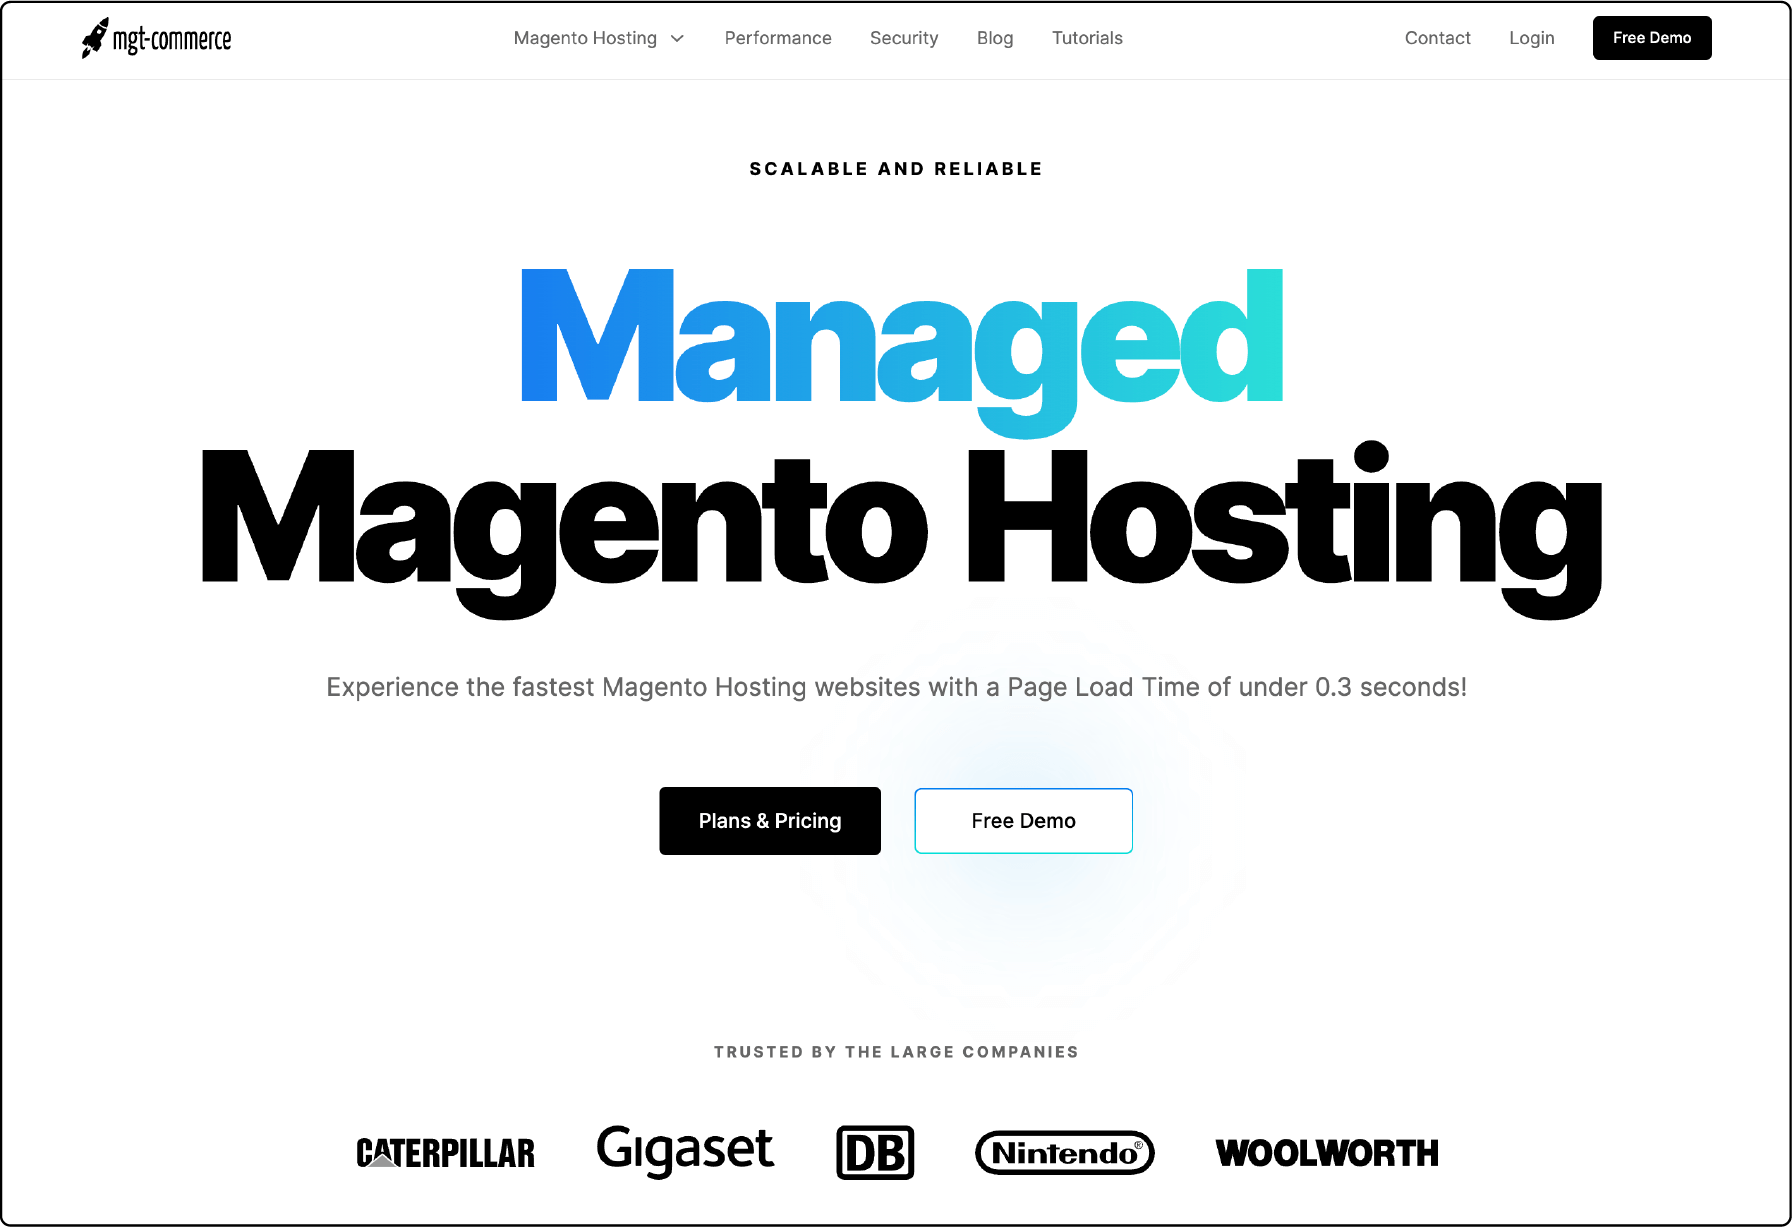 Best hosting company for magento by MGT-Commerce